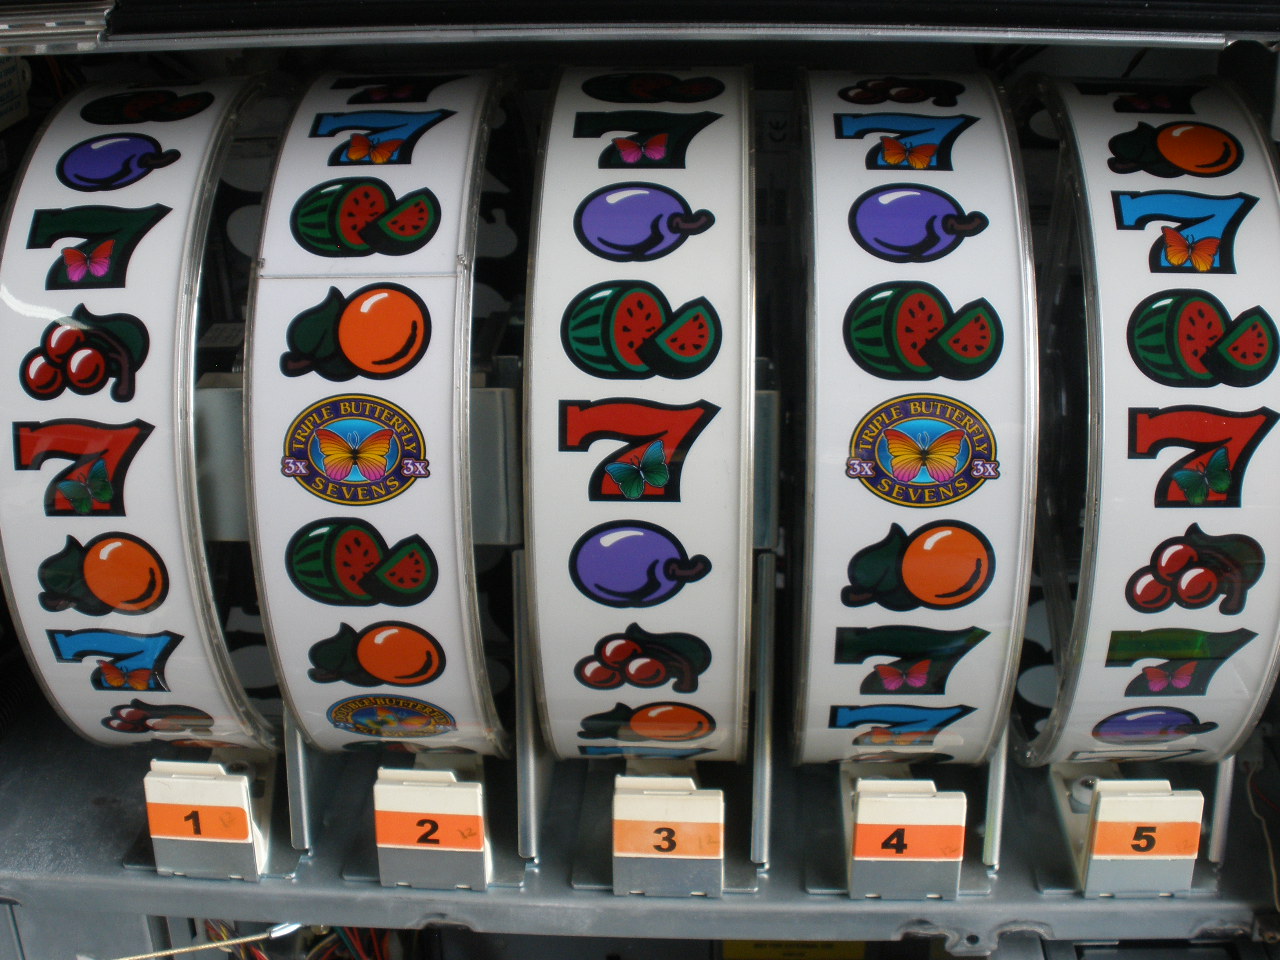 why there are only 5 slot machines